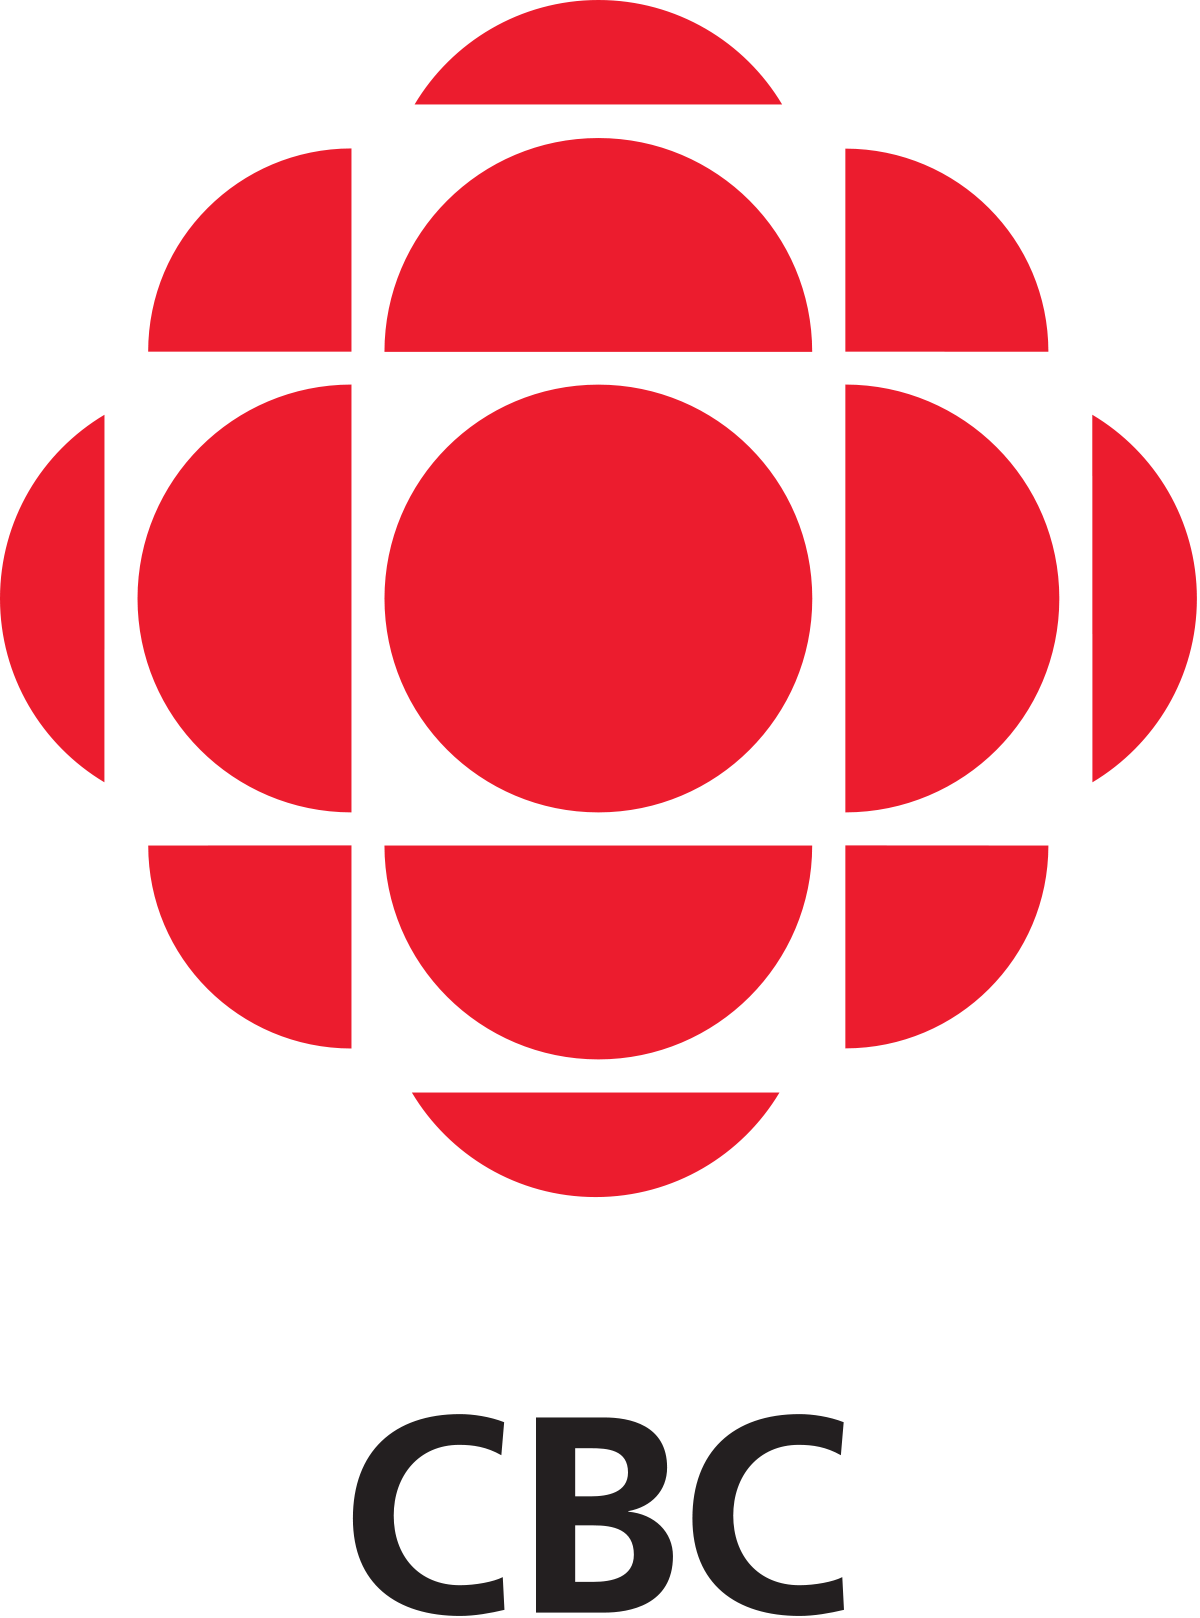 What are some stations offering curling events on television?